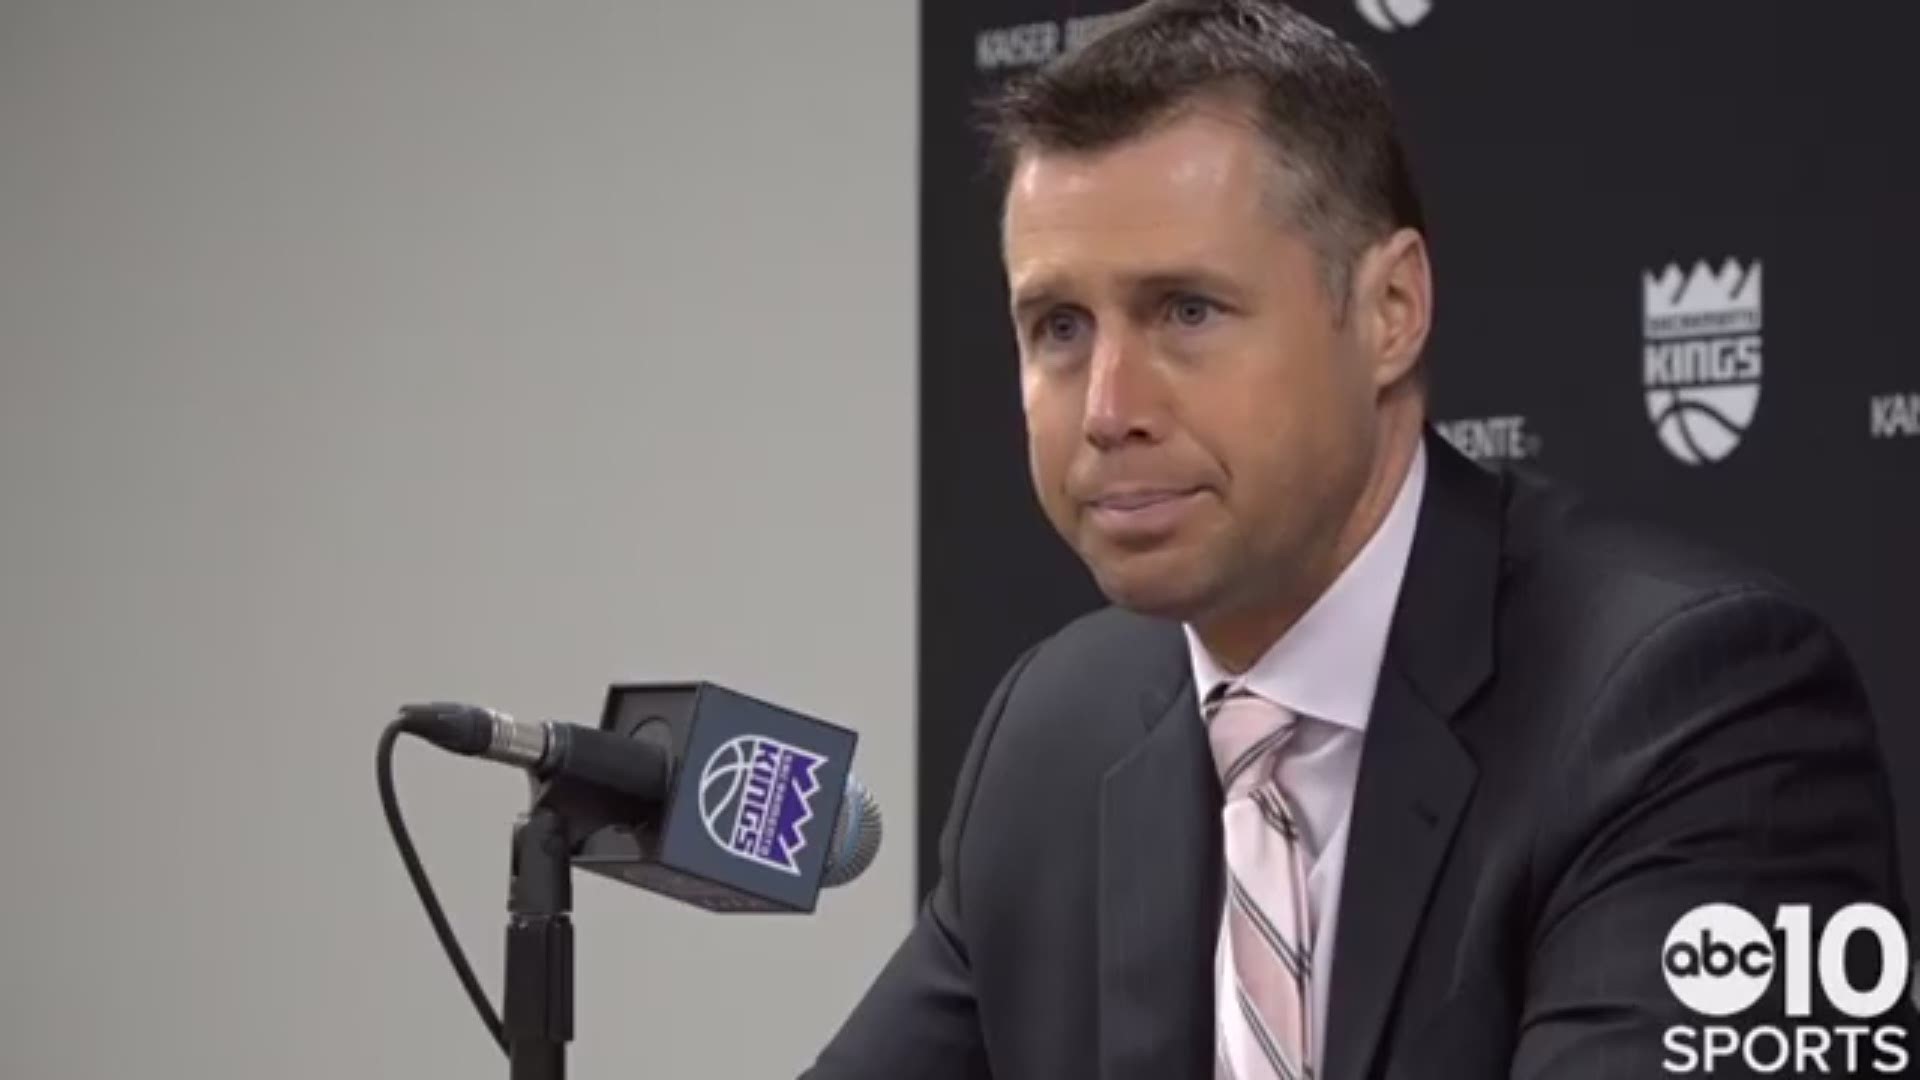 Sacramento Kings head coach Dave Joerger talks about his team's bounce-back game to beat the Dallas Mavericks 116-100 on Thursday night, Buddy Hield snapping out of his shooting slump, provides an injury update for Harry Giles, and the double-double performances from Willie Cauley-Stein and Marvin Bagley III.